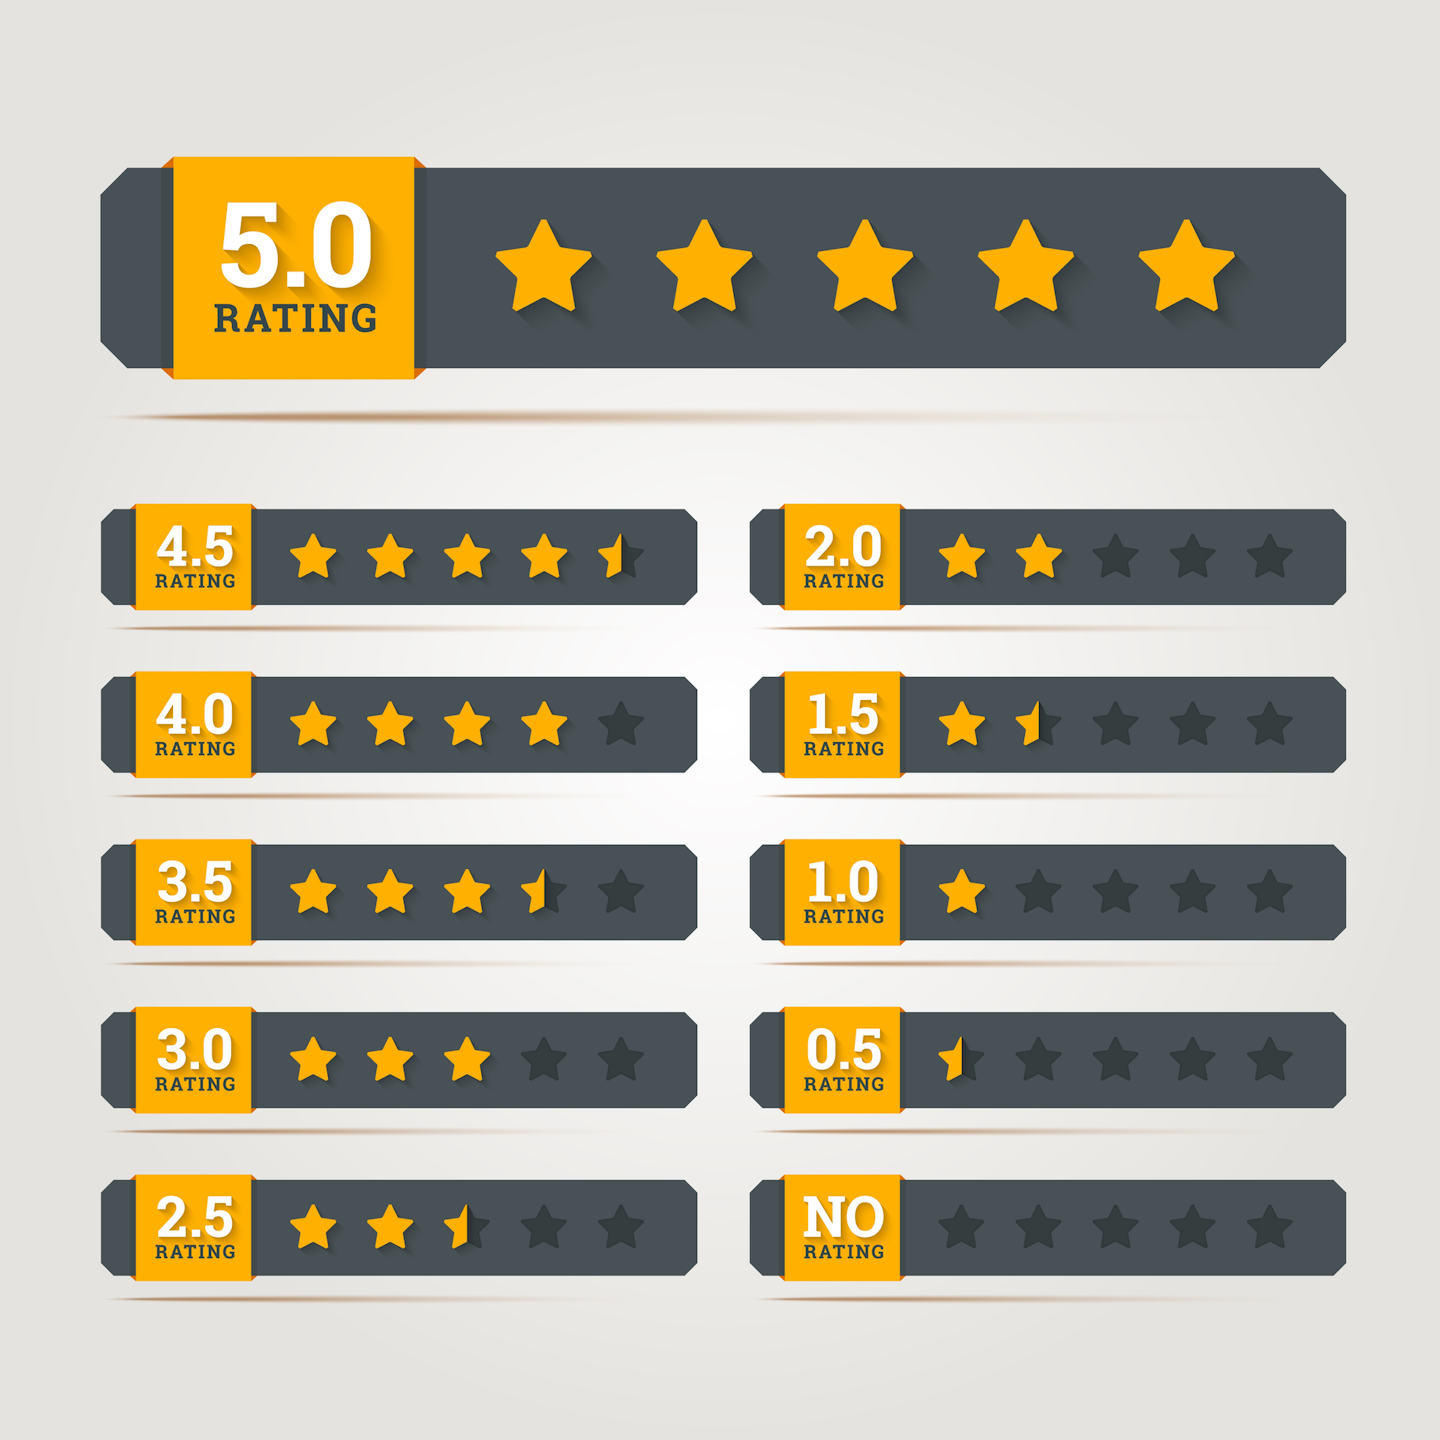 CMS Releases Updated Quality Star Ratings for Hospitals Healthcare